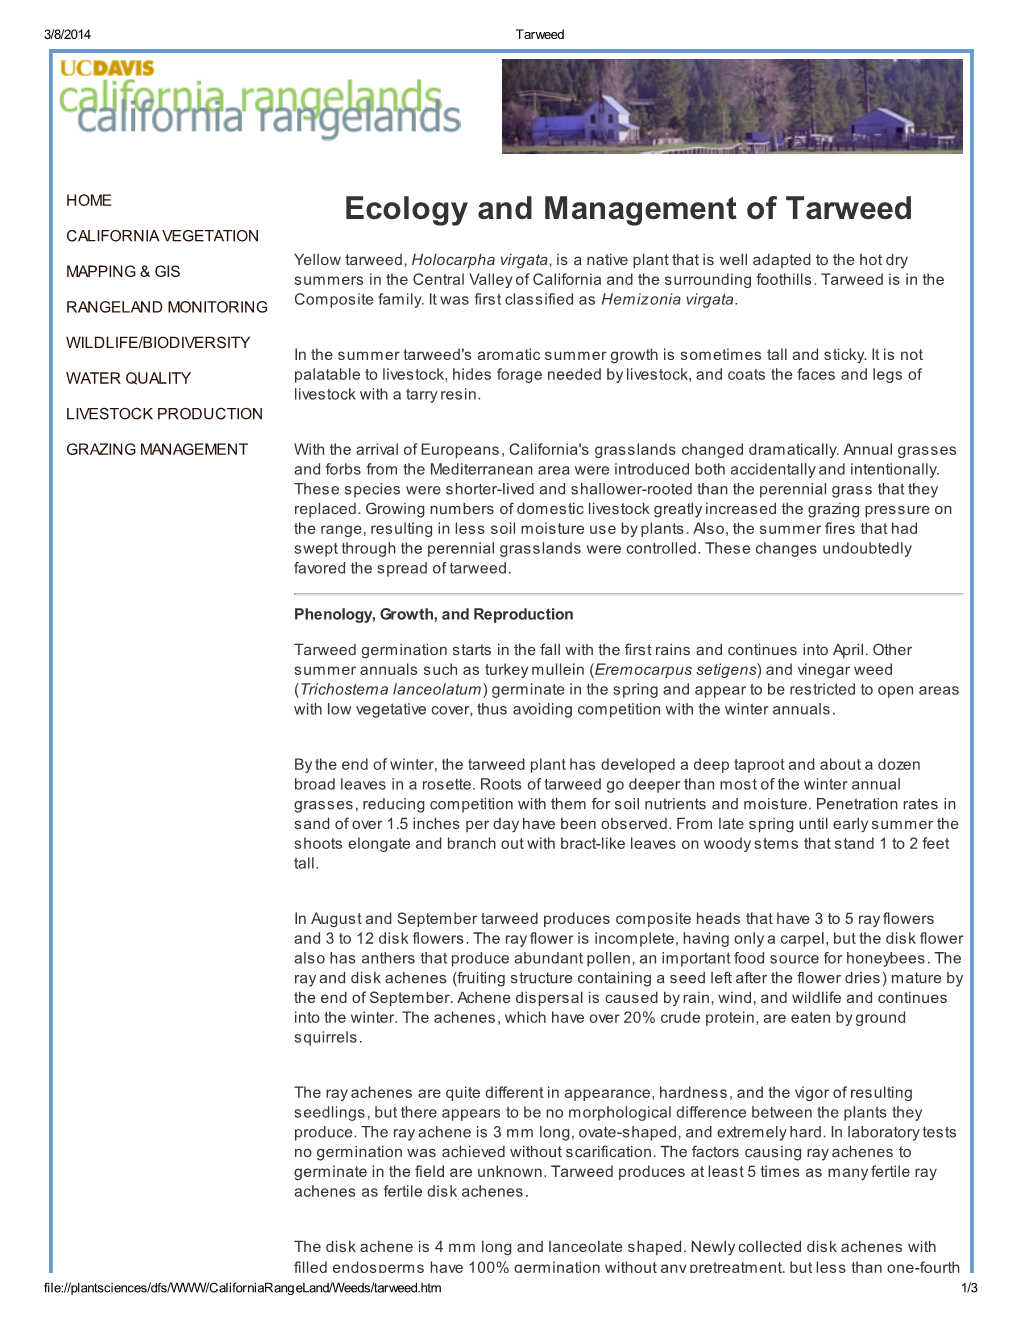 Ecology and Management of Tarweed